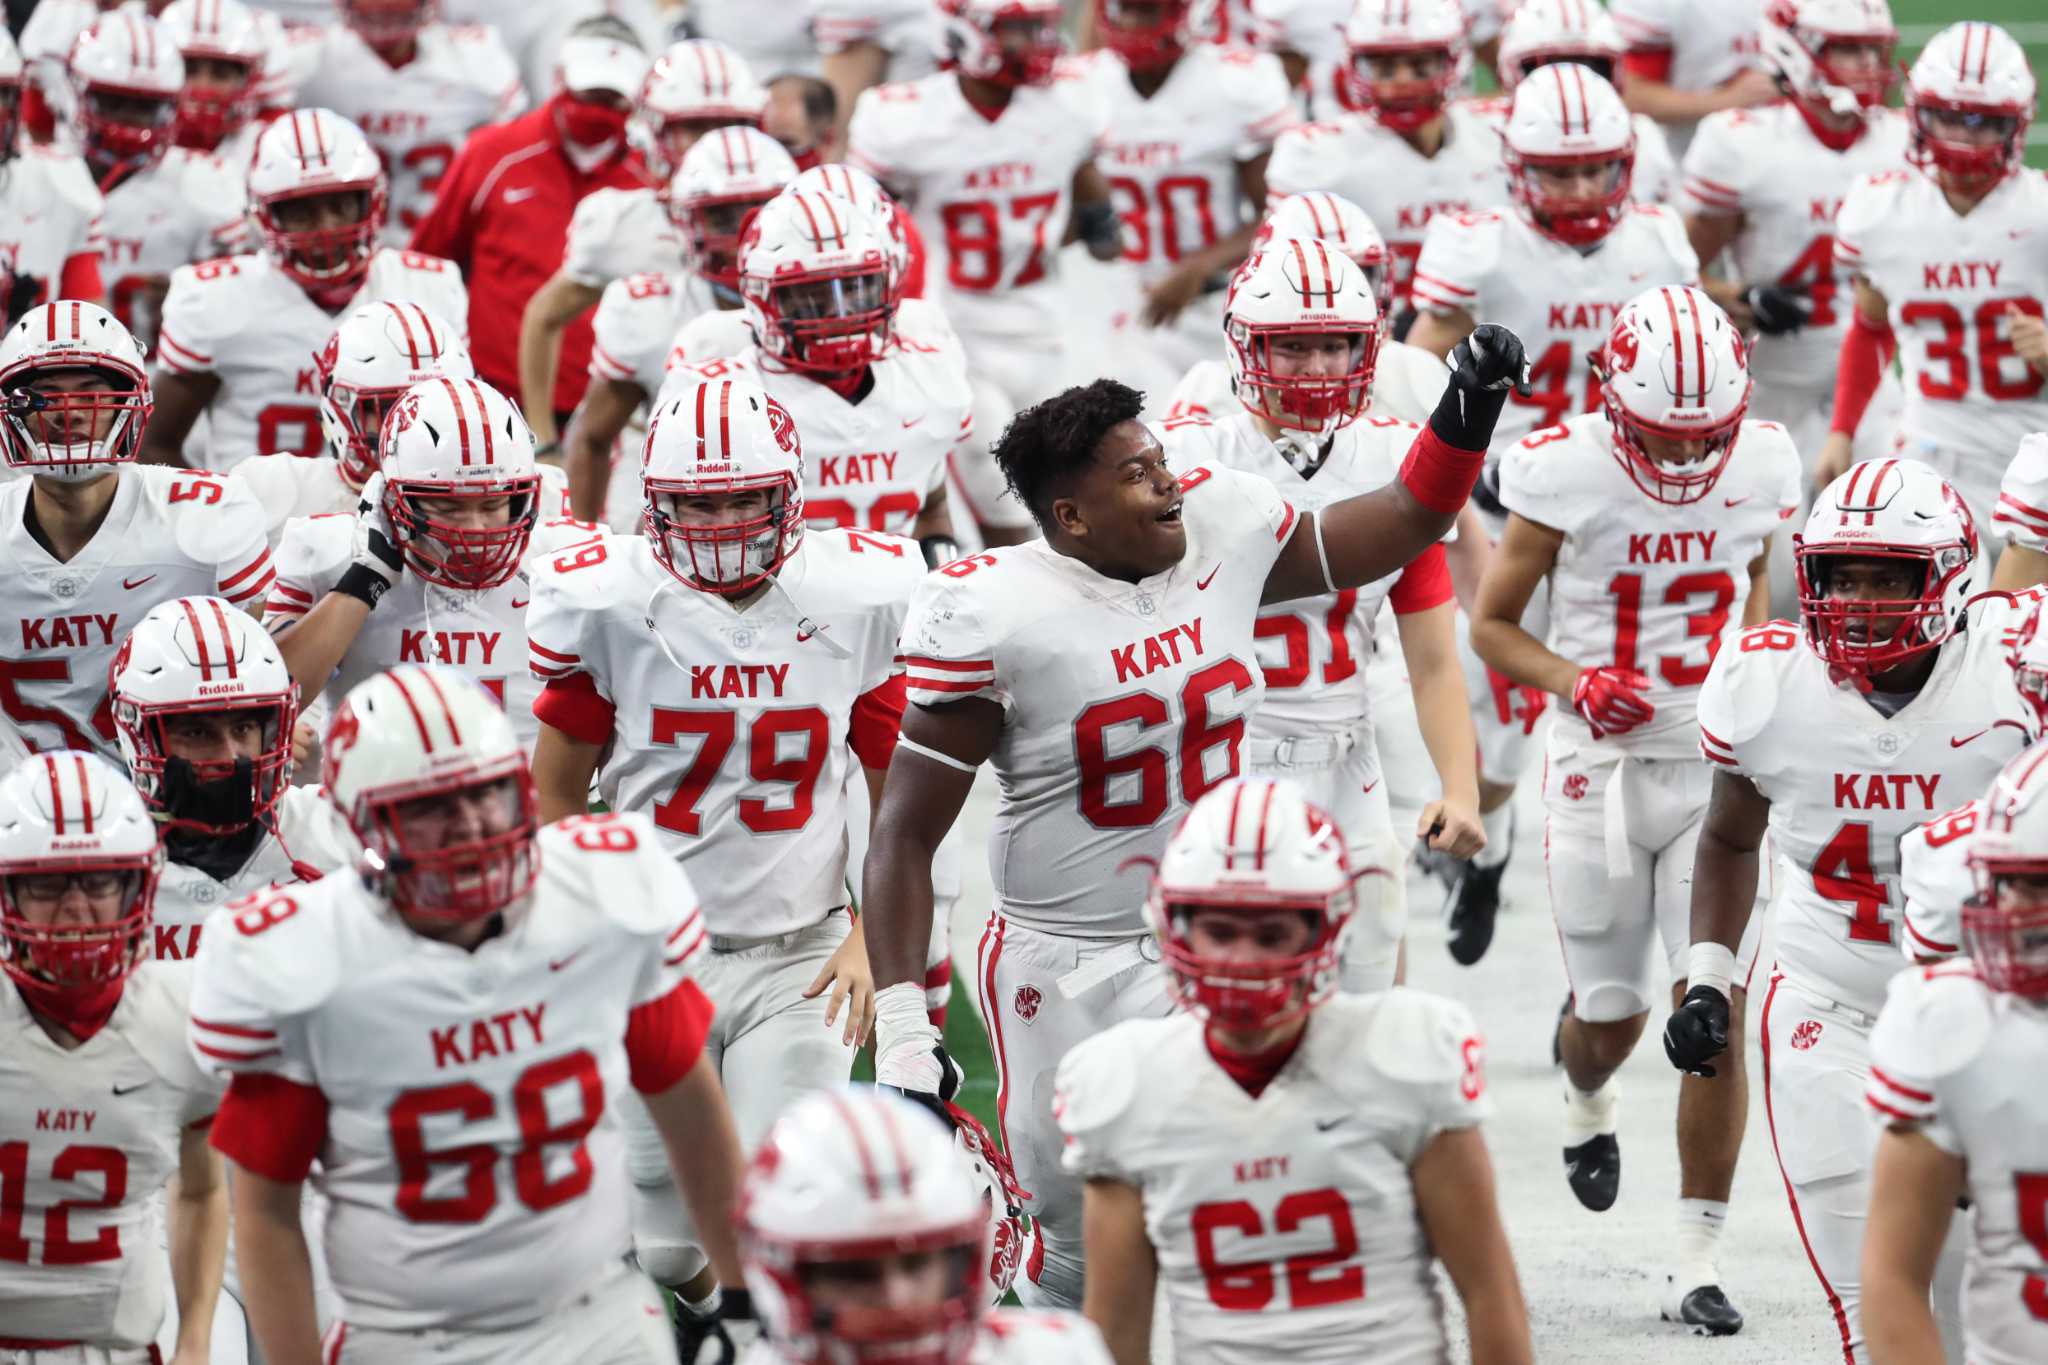 Katy ISD football schedule nearly in place for 2021